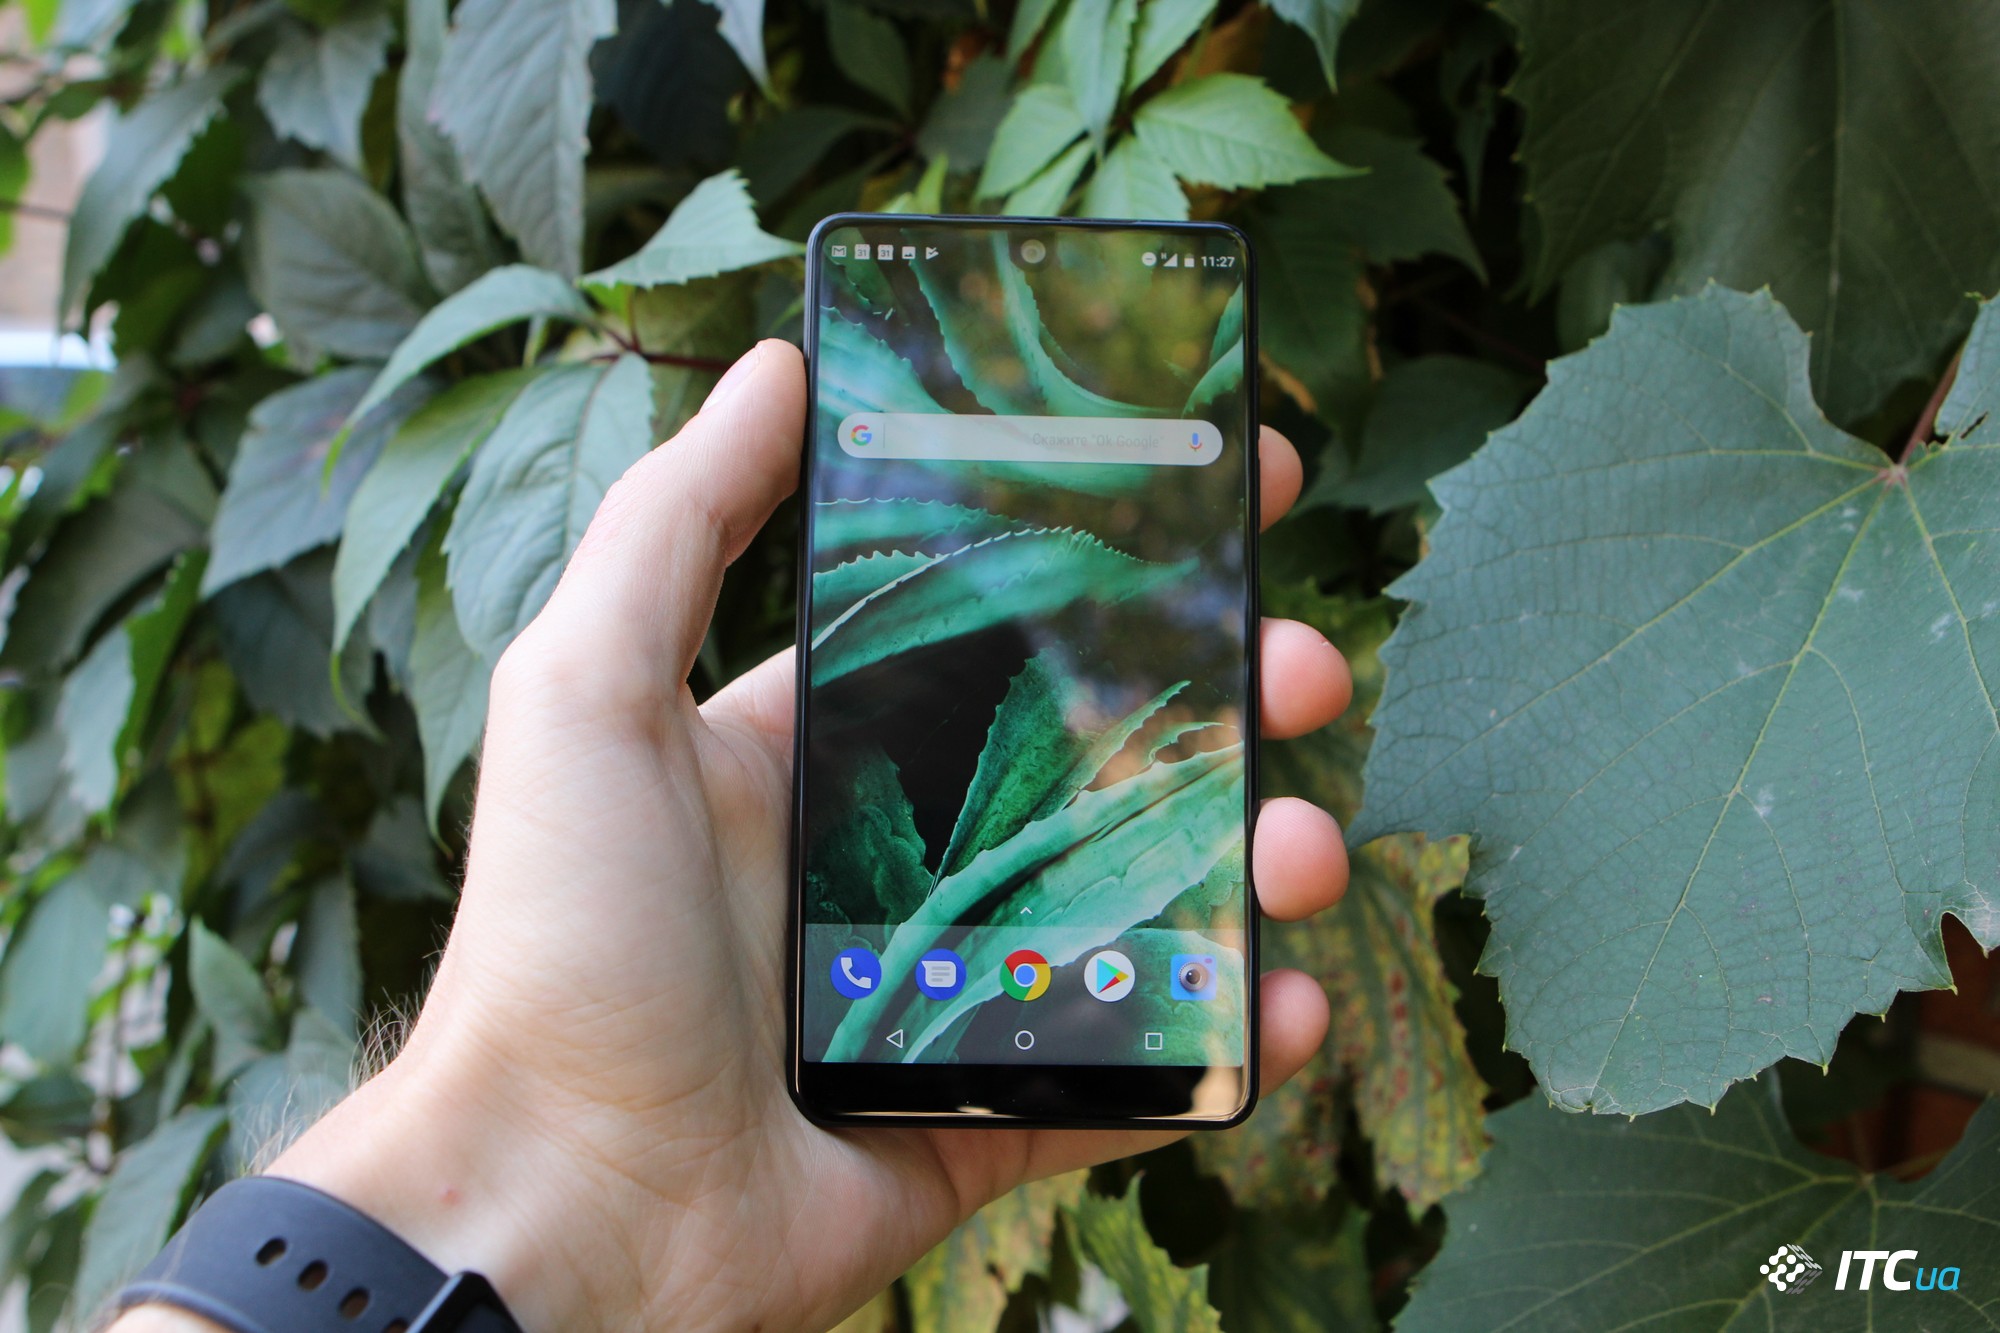  Essential Phone (PH-1):     Android